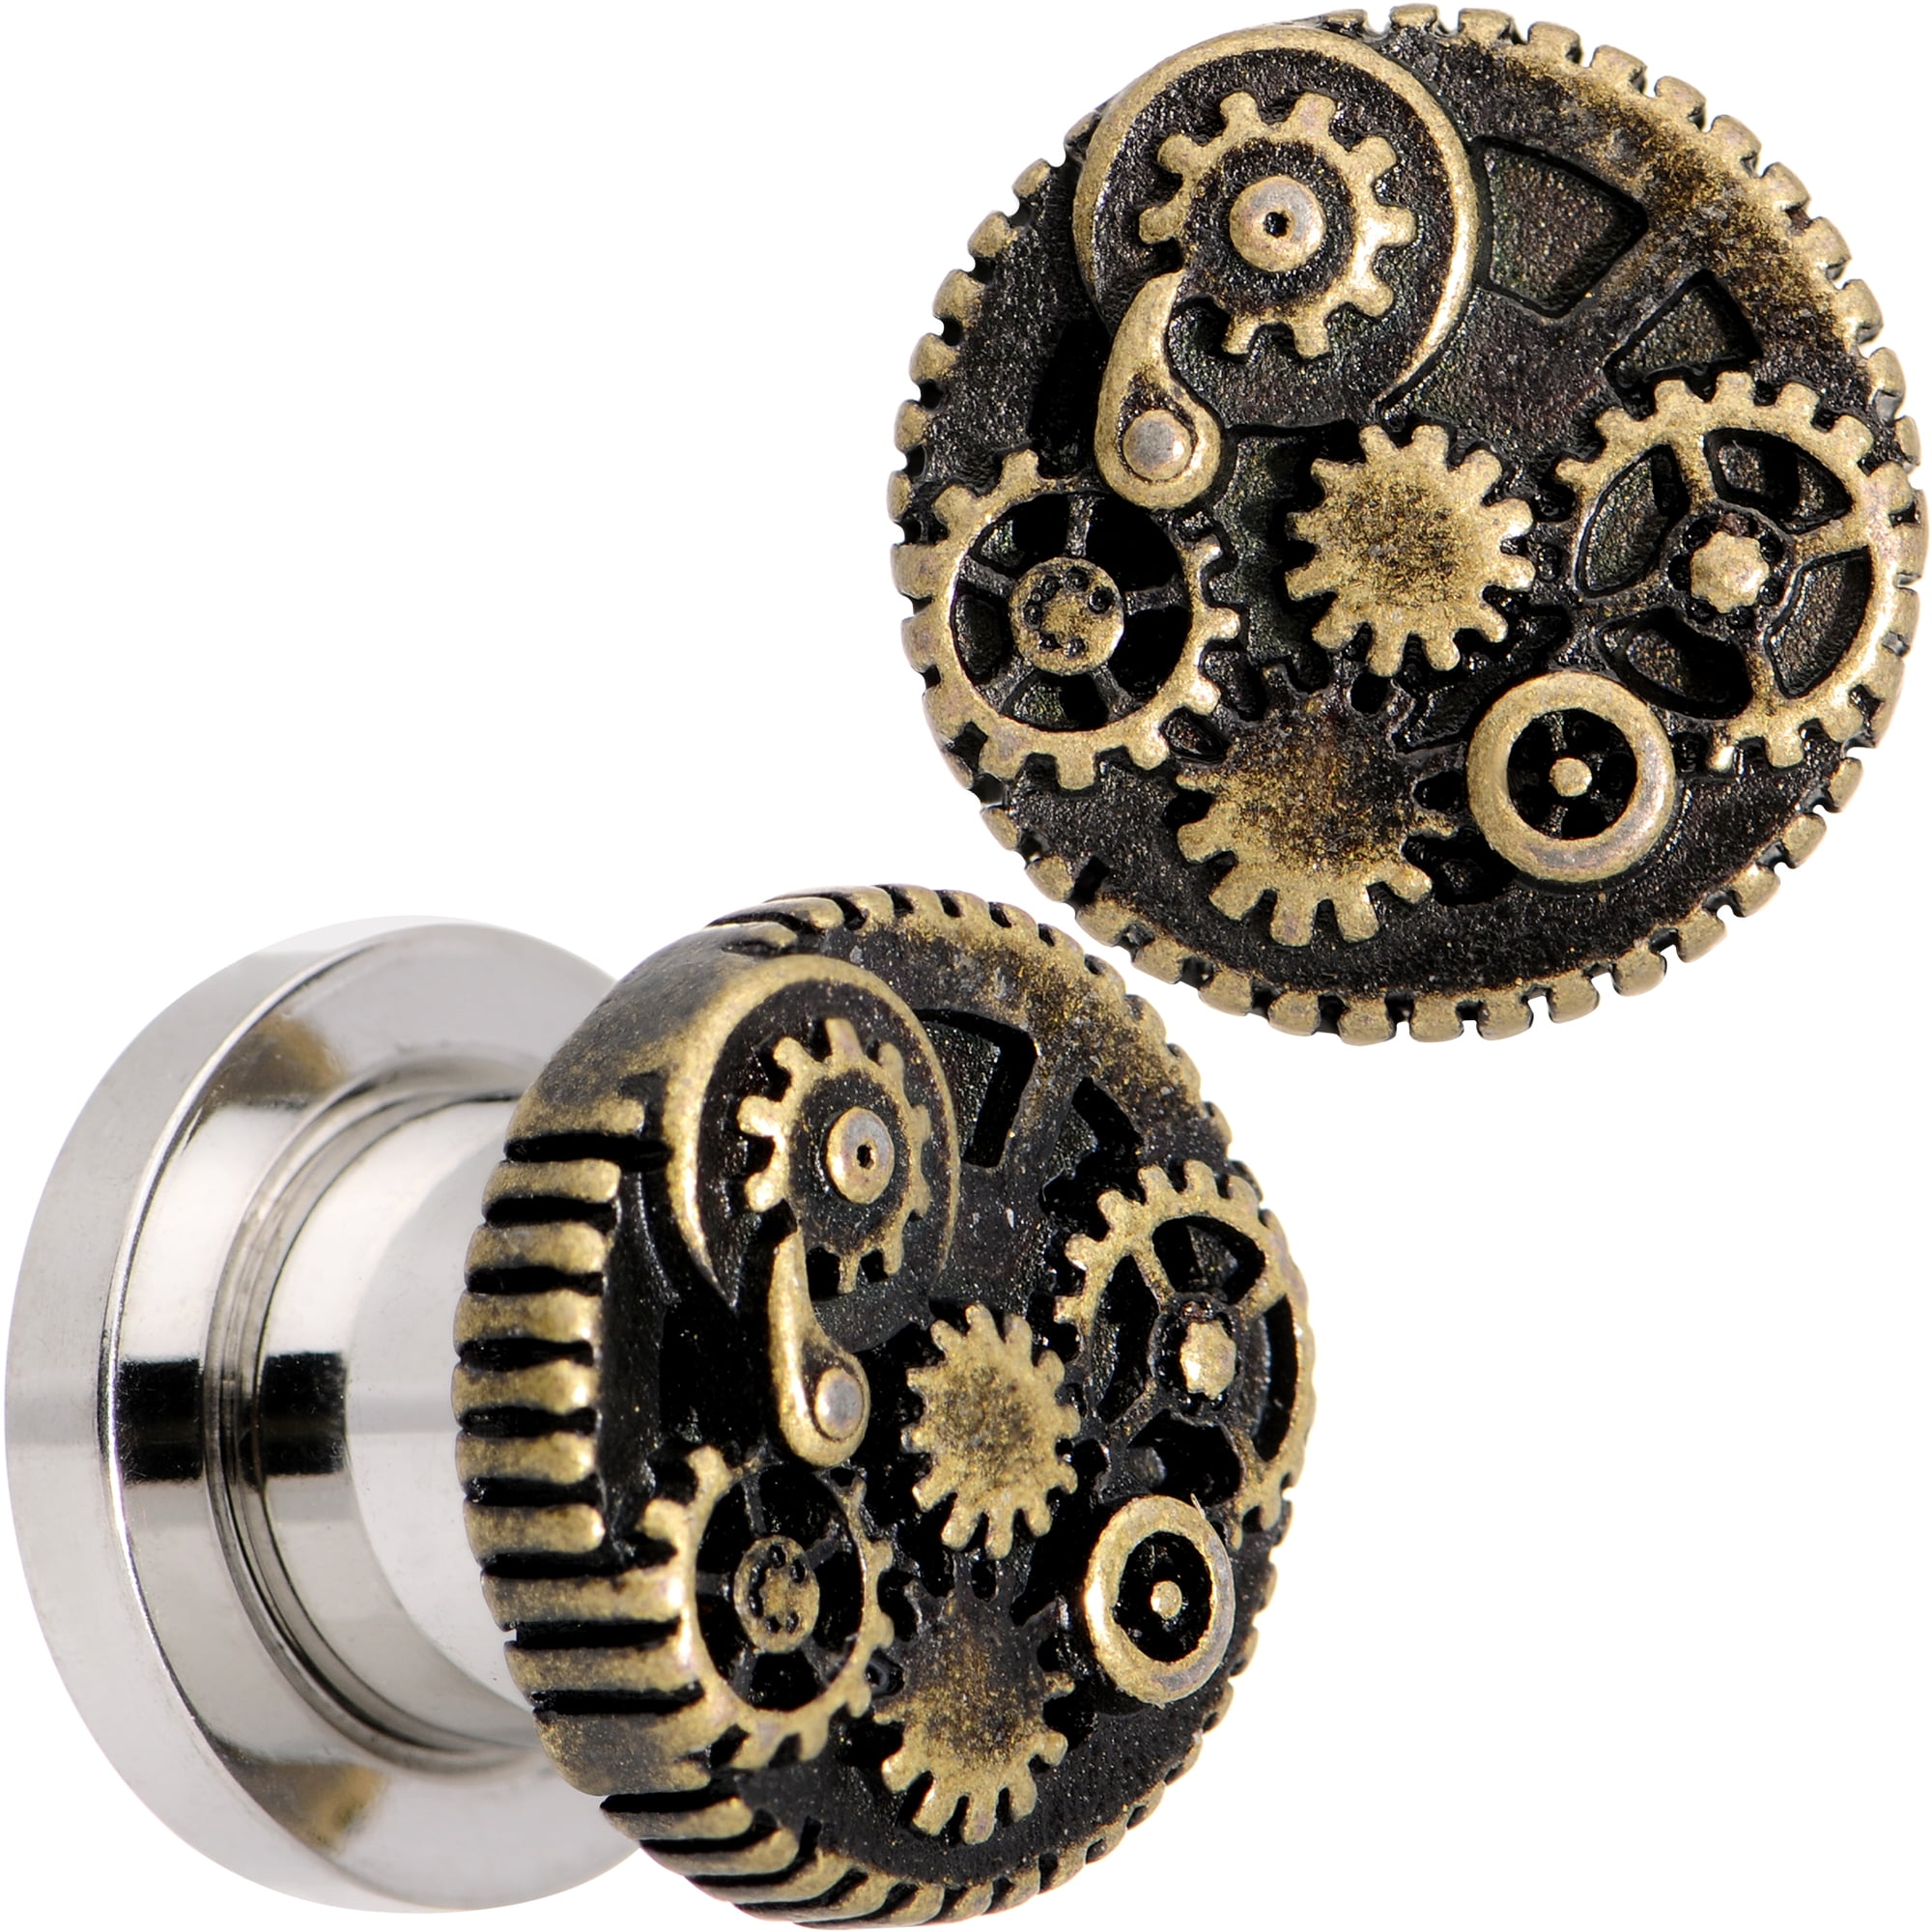 Steampunk earrings unique made of all metal gears